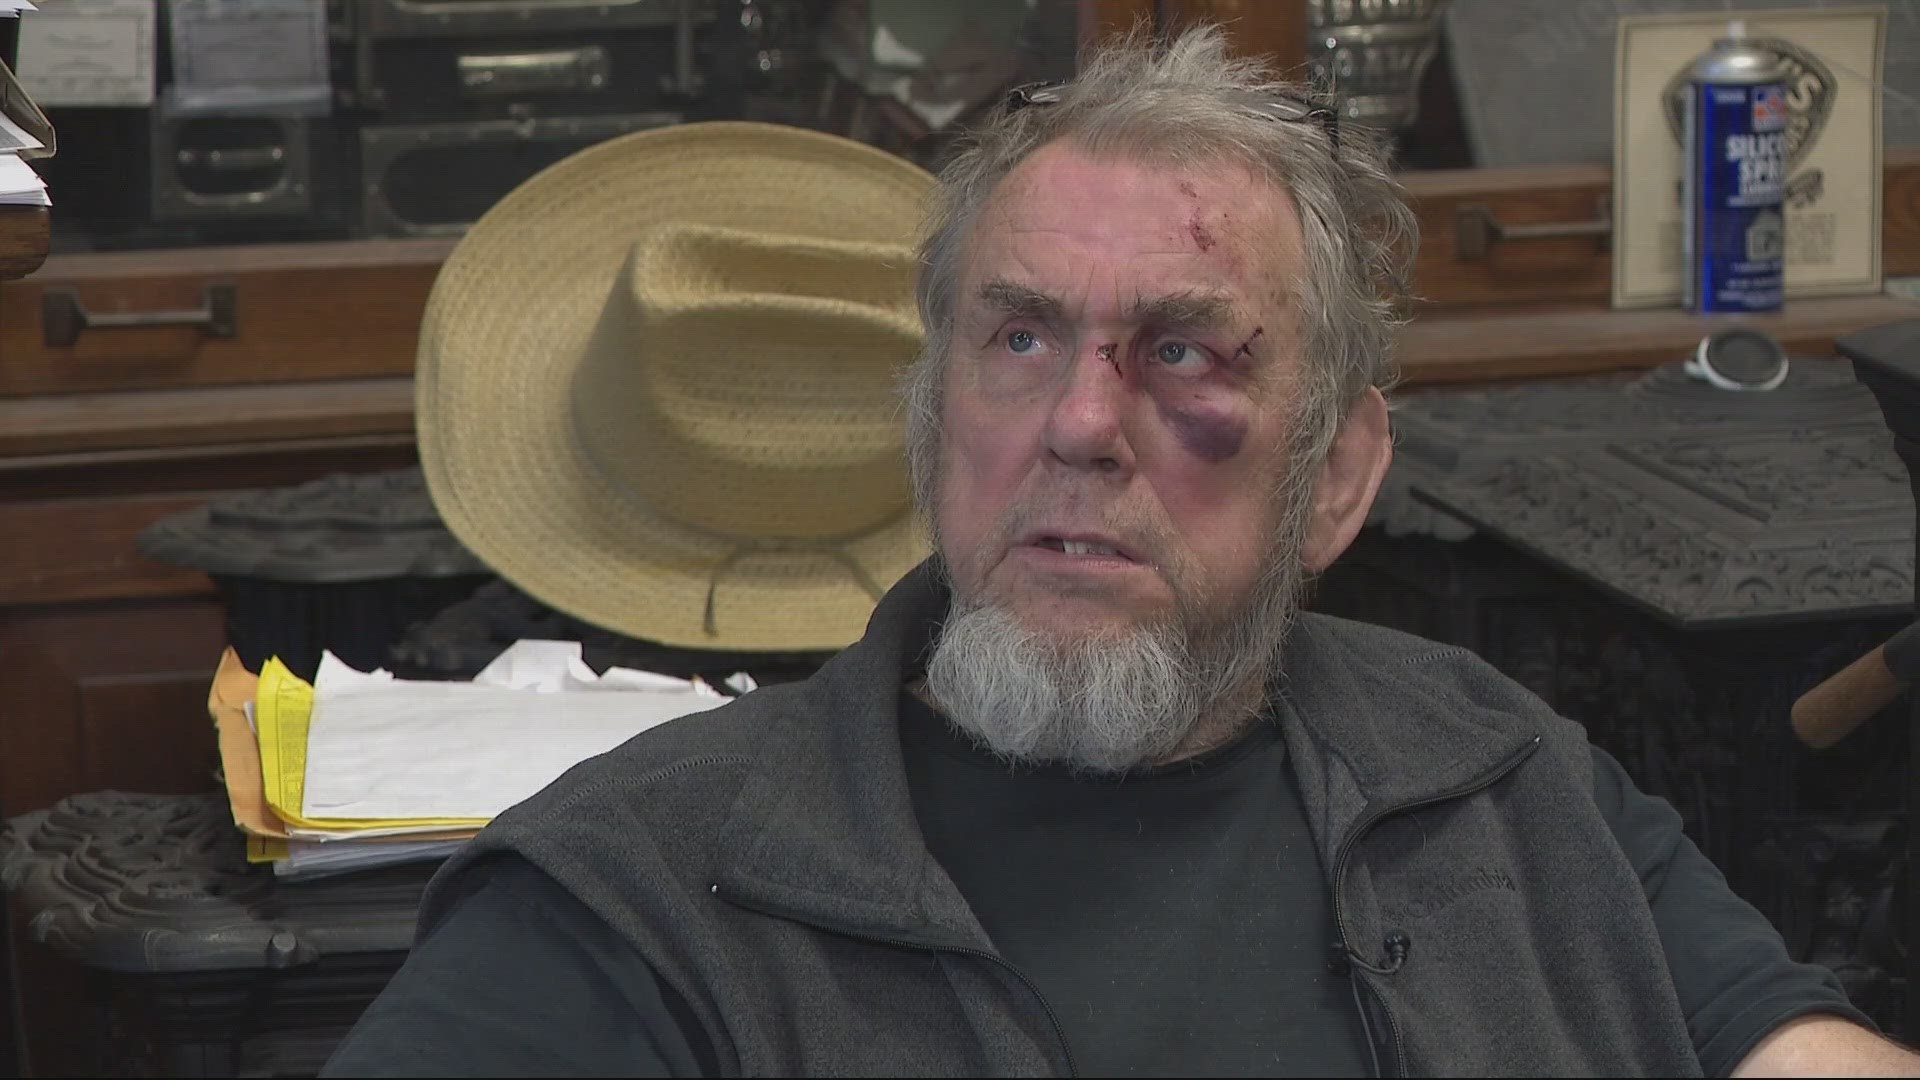 Store owner, Buck Froman got a black eye after falling while trying to confront thieves during one of several recent break-ins.